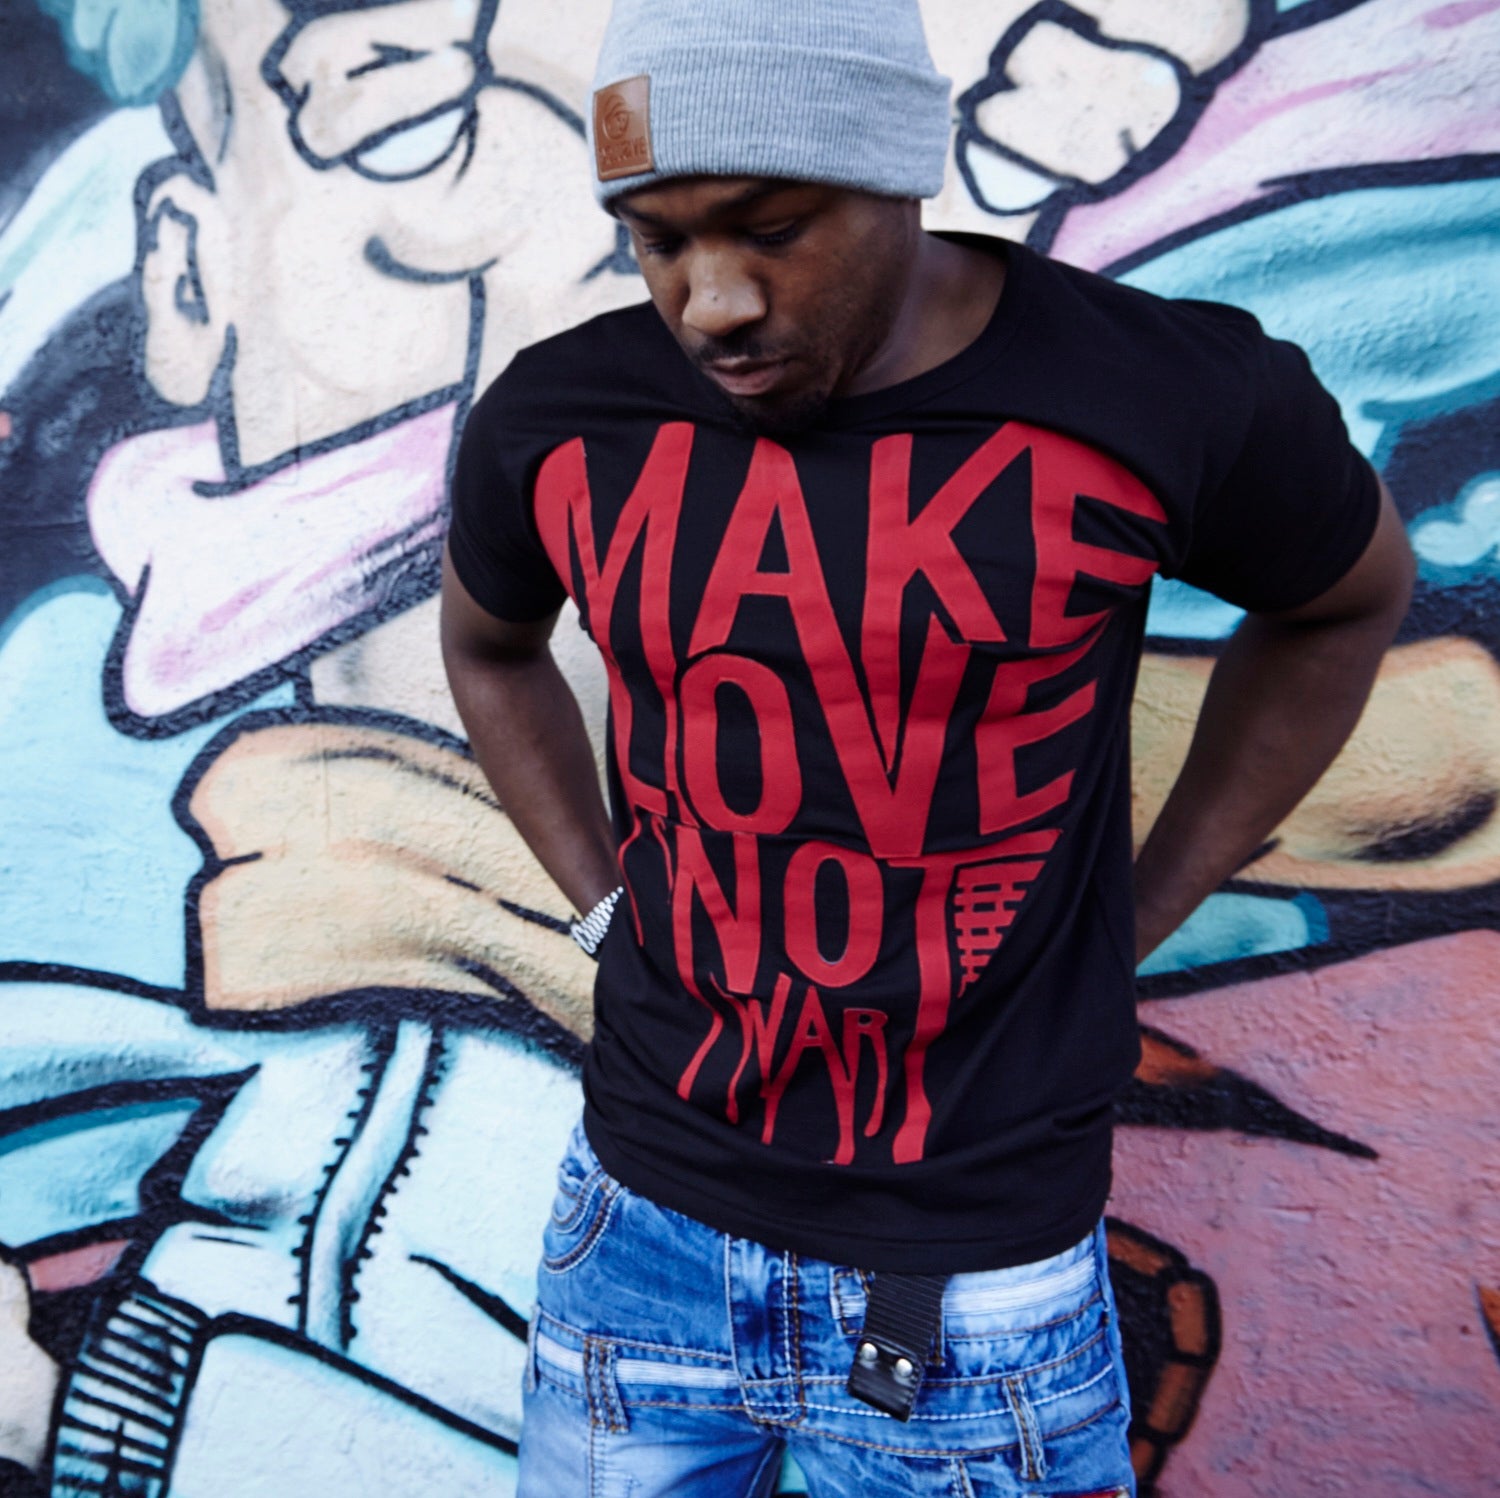 Manchester's Fullahype in a Custom Appliqued T-shirt, Blood red make love not war textile logo, cut and sewed onto a earth positive Black organic cotton heavyweight T-shirt. Graffiti wall at the side of the shop Ridelow in the background. 